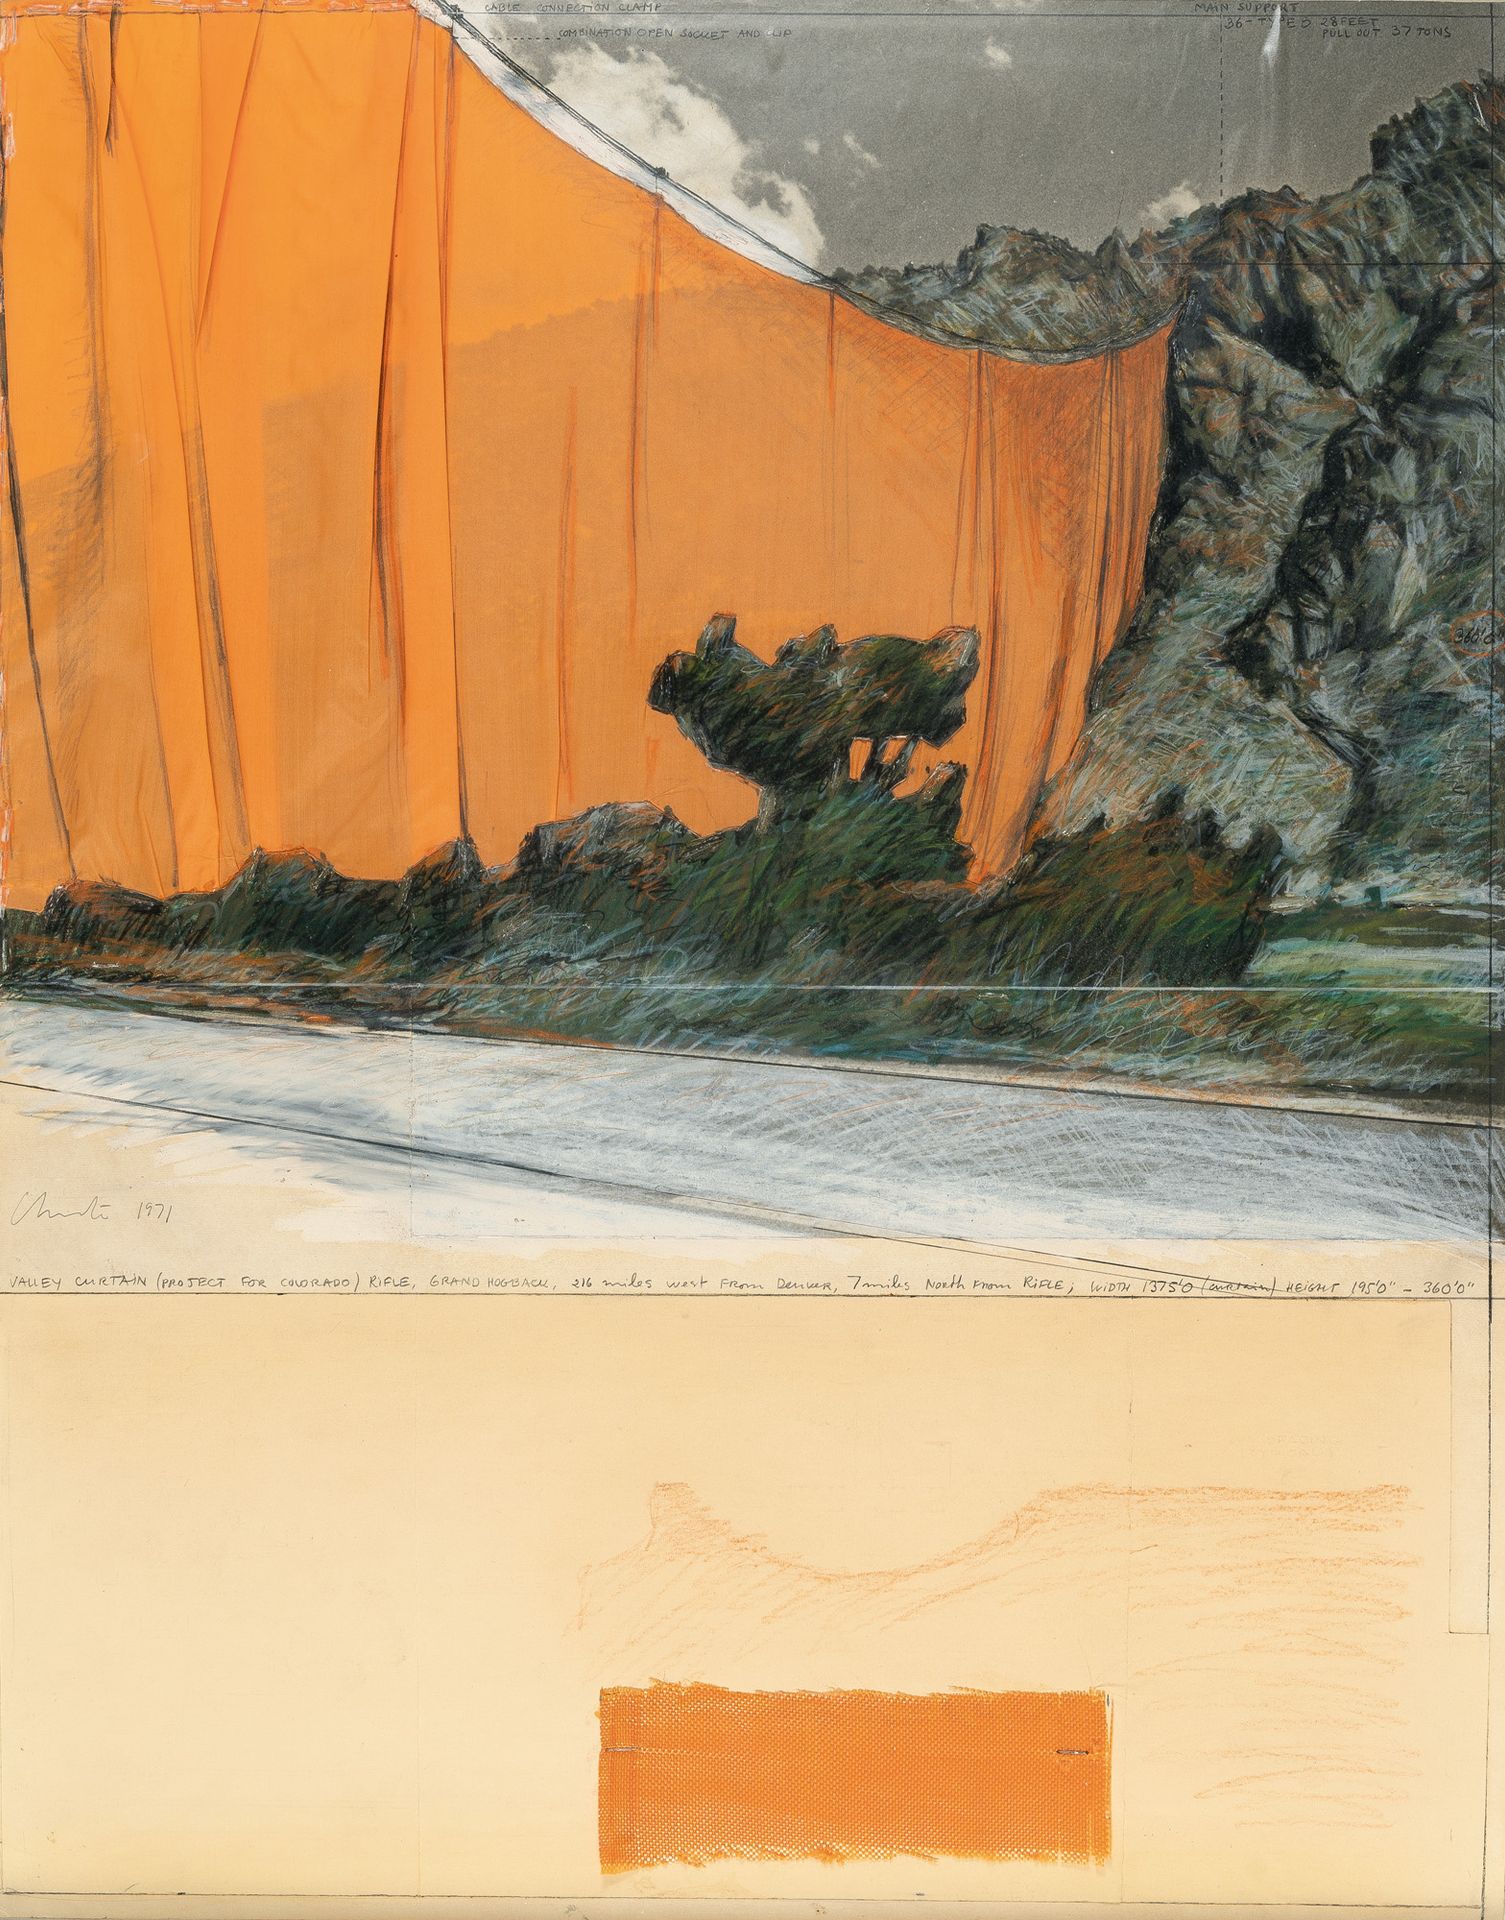 Christo und Jeanne-Claude Christo et Jeanne-Claude, "Valley Curtain (Project for&hellip;